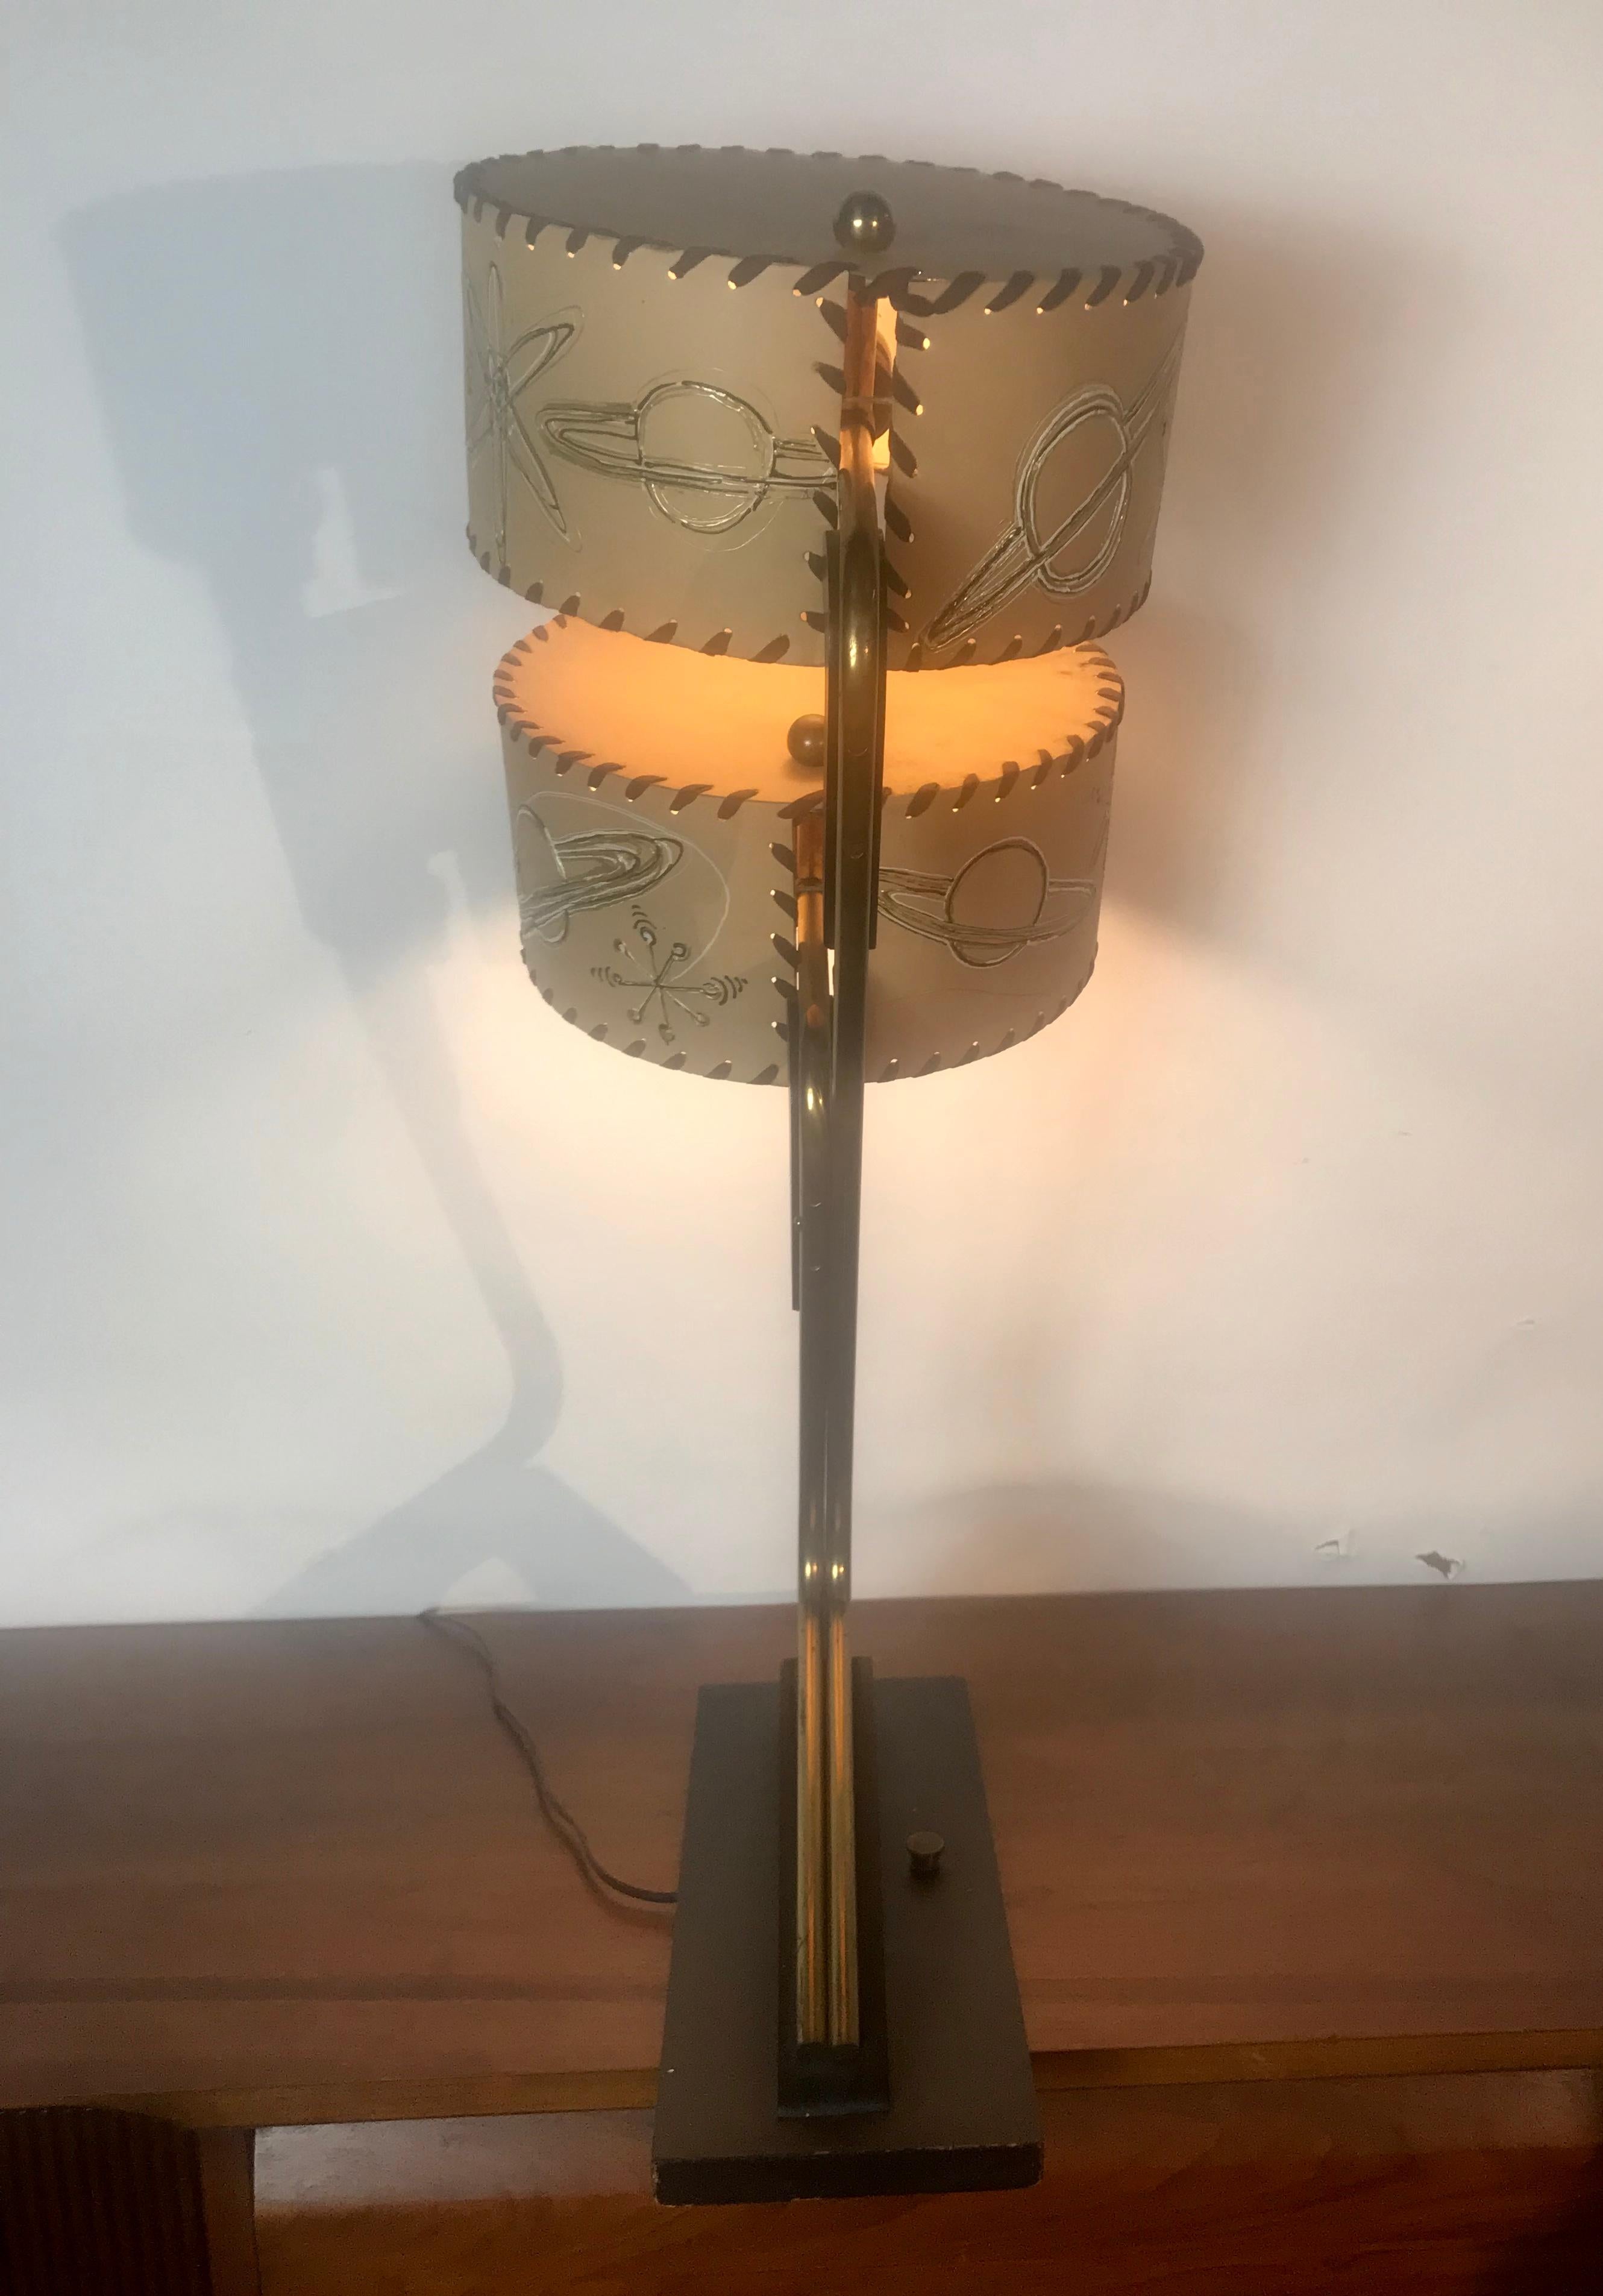 Wood Unusual Mid-Century Modern Table Lamp by Majestic Lamp, Original Atomic Shades